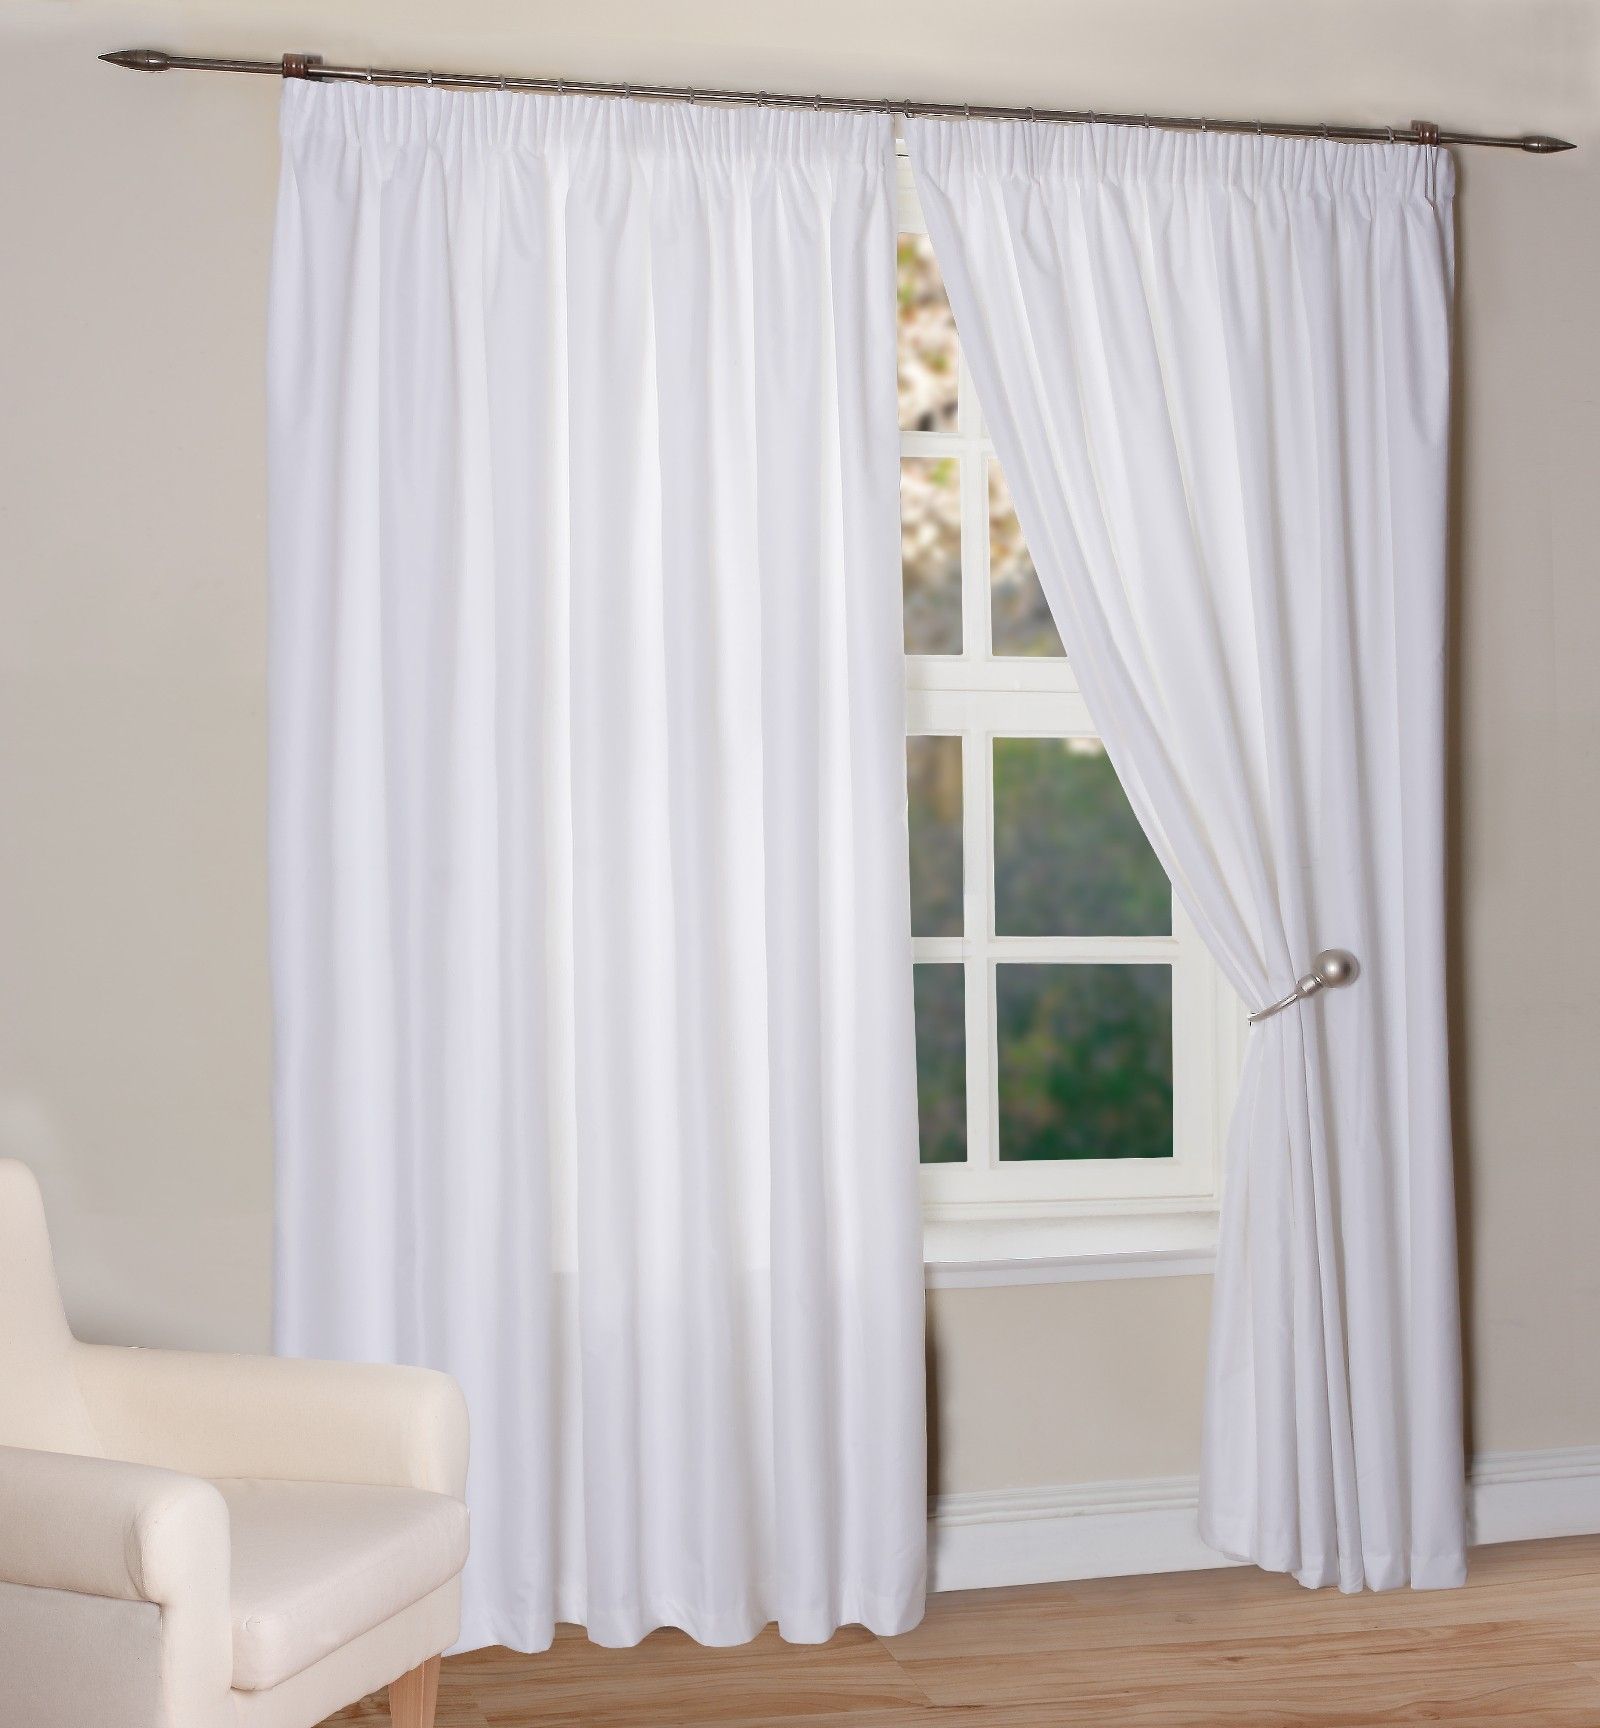 Curtain Inspiring Curtains White White Curtains Bedroom Living Throughout White Thick Curtains (View 5 of 15)